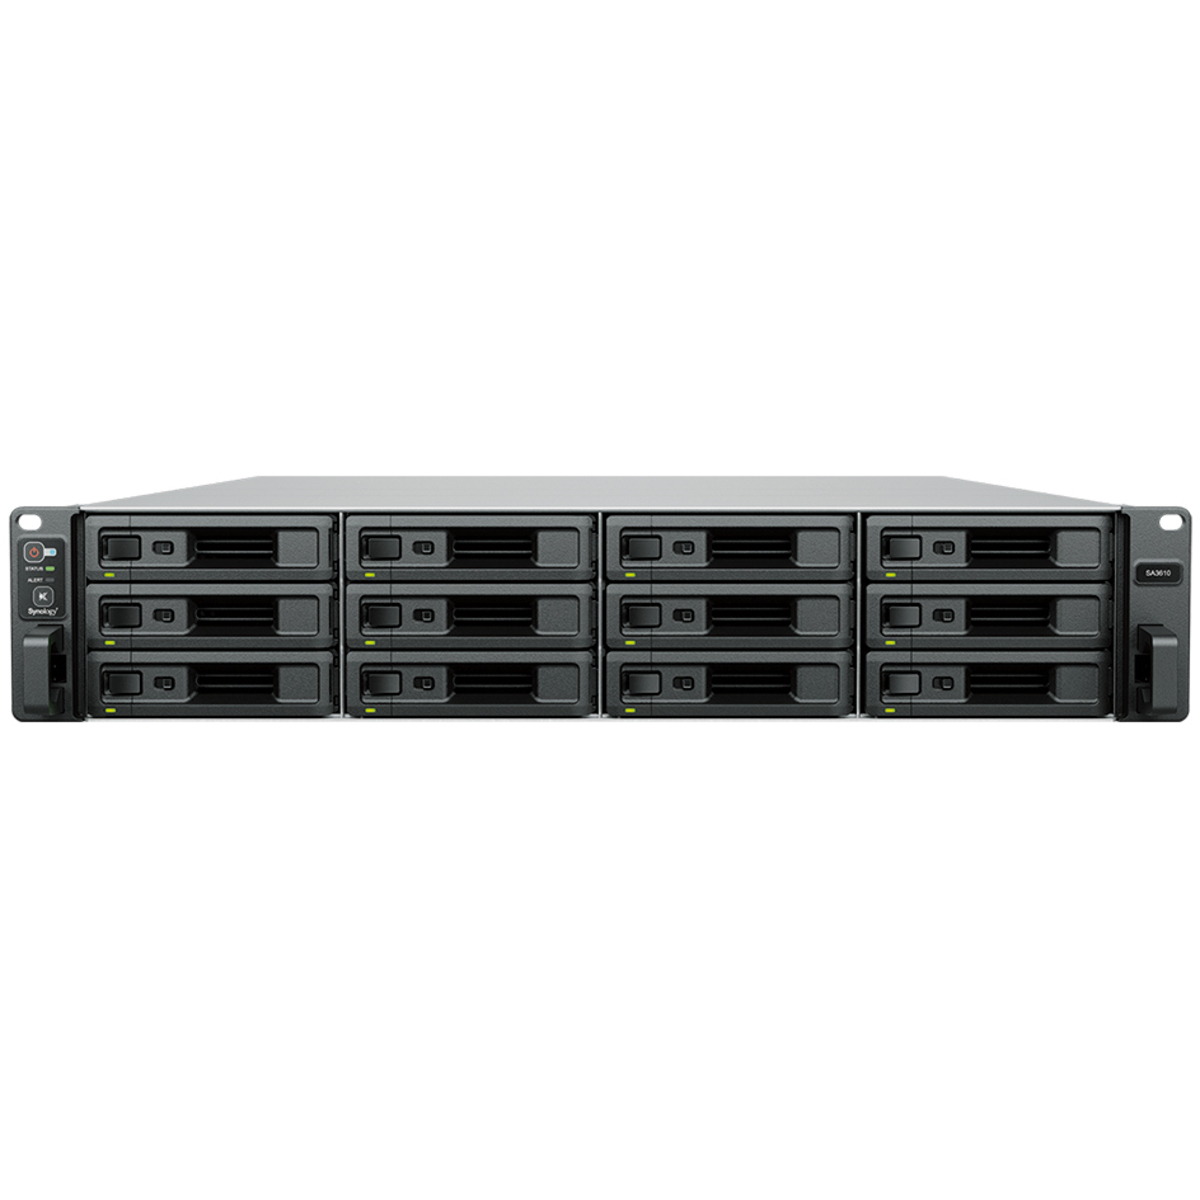 Synology RackStation SA3410 23tb 12-Bay RackMount Large Business / Enterprise NAS - Network Attached Storage Device 12x1.9tb Synology SAT5210 Series SAT5210-1920G 2.5 530/500MB/s SATA 6Gb/s SSD ENTERPRISE Class Drives Installed - Burn-In Tested RackStation SA3410